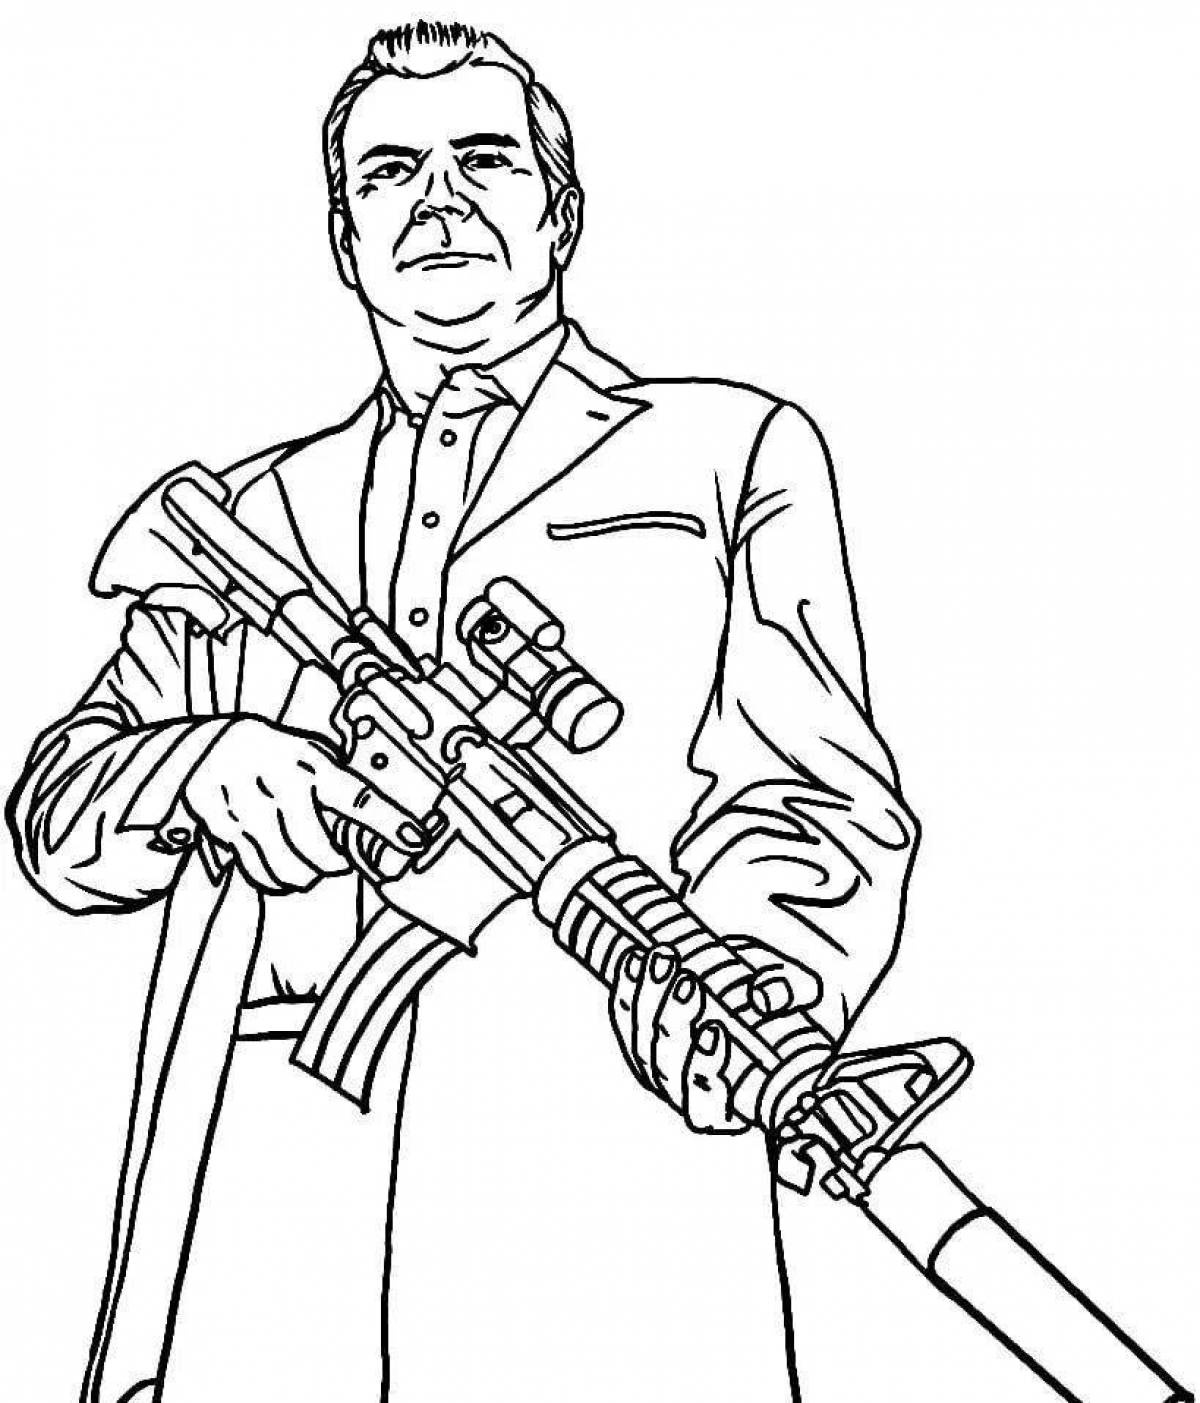 Fancy jel from gta 5 coloring book